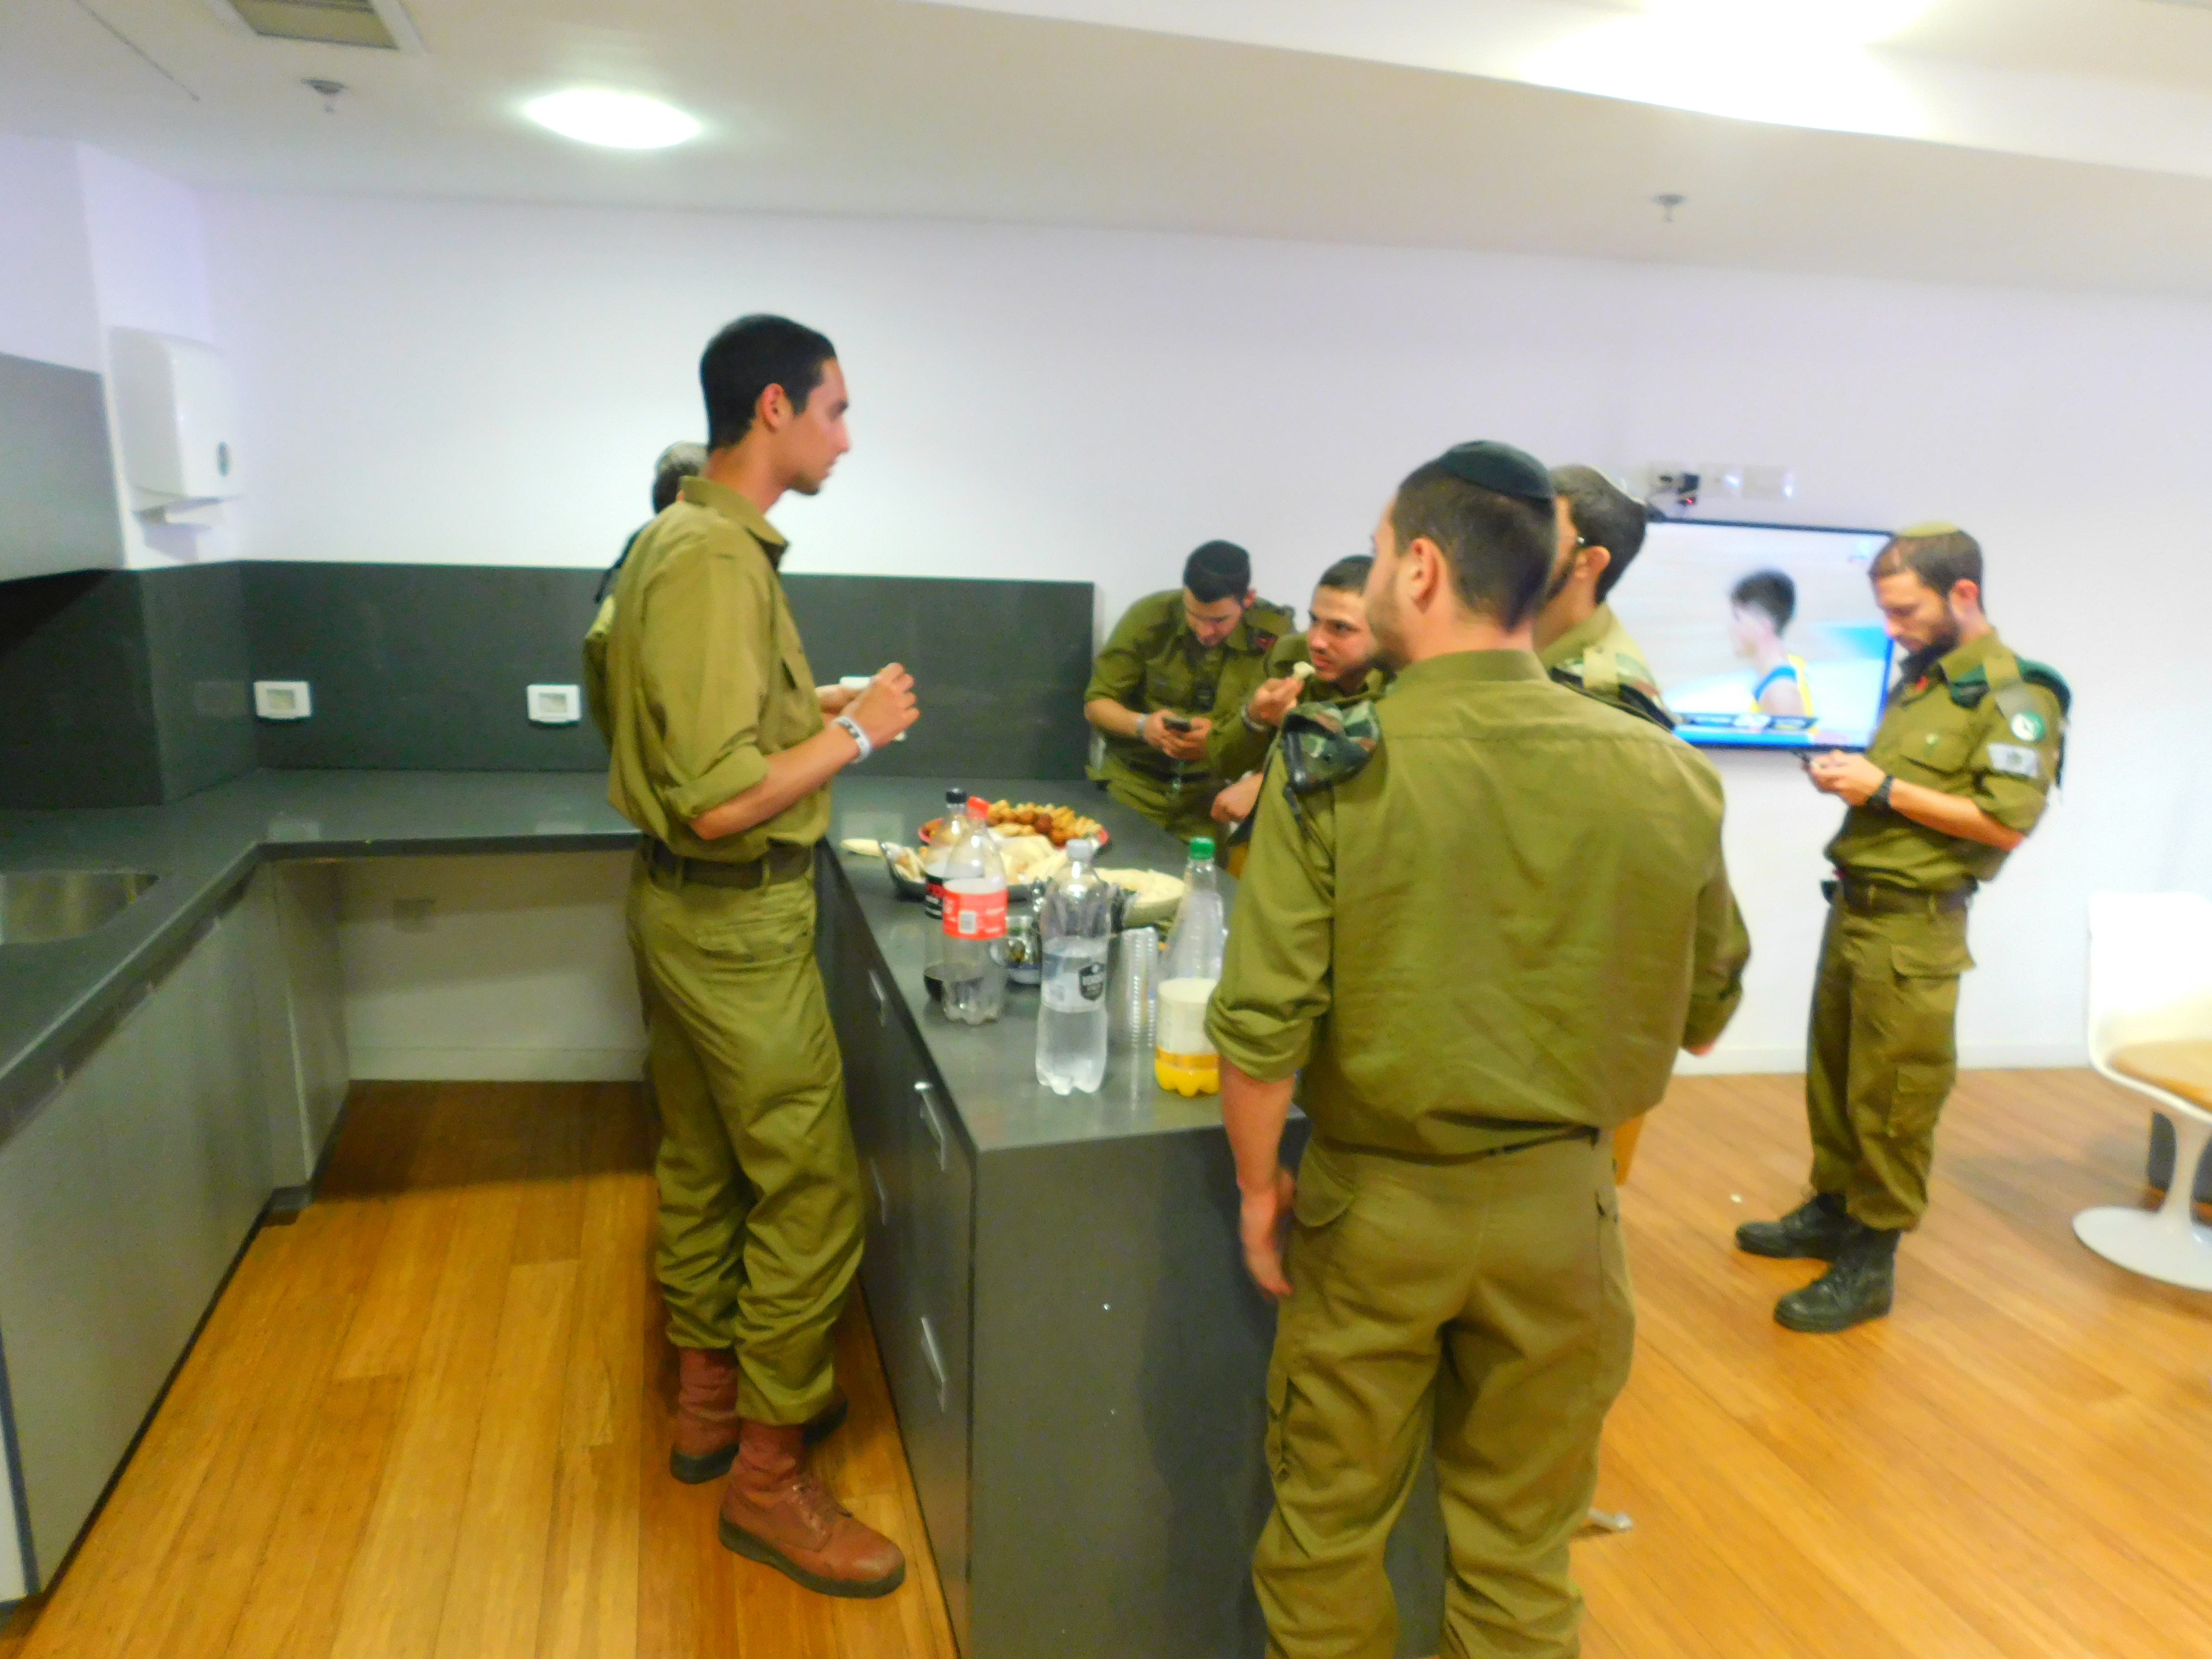 IDF soldiers enjoy the snacks provided at their VIP box at the HaPoel Jerusalem basketball arena.